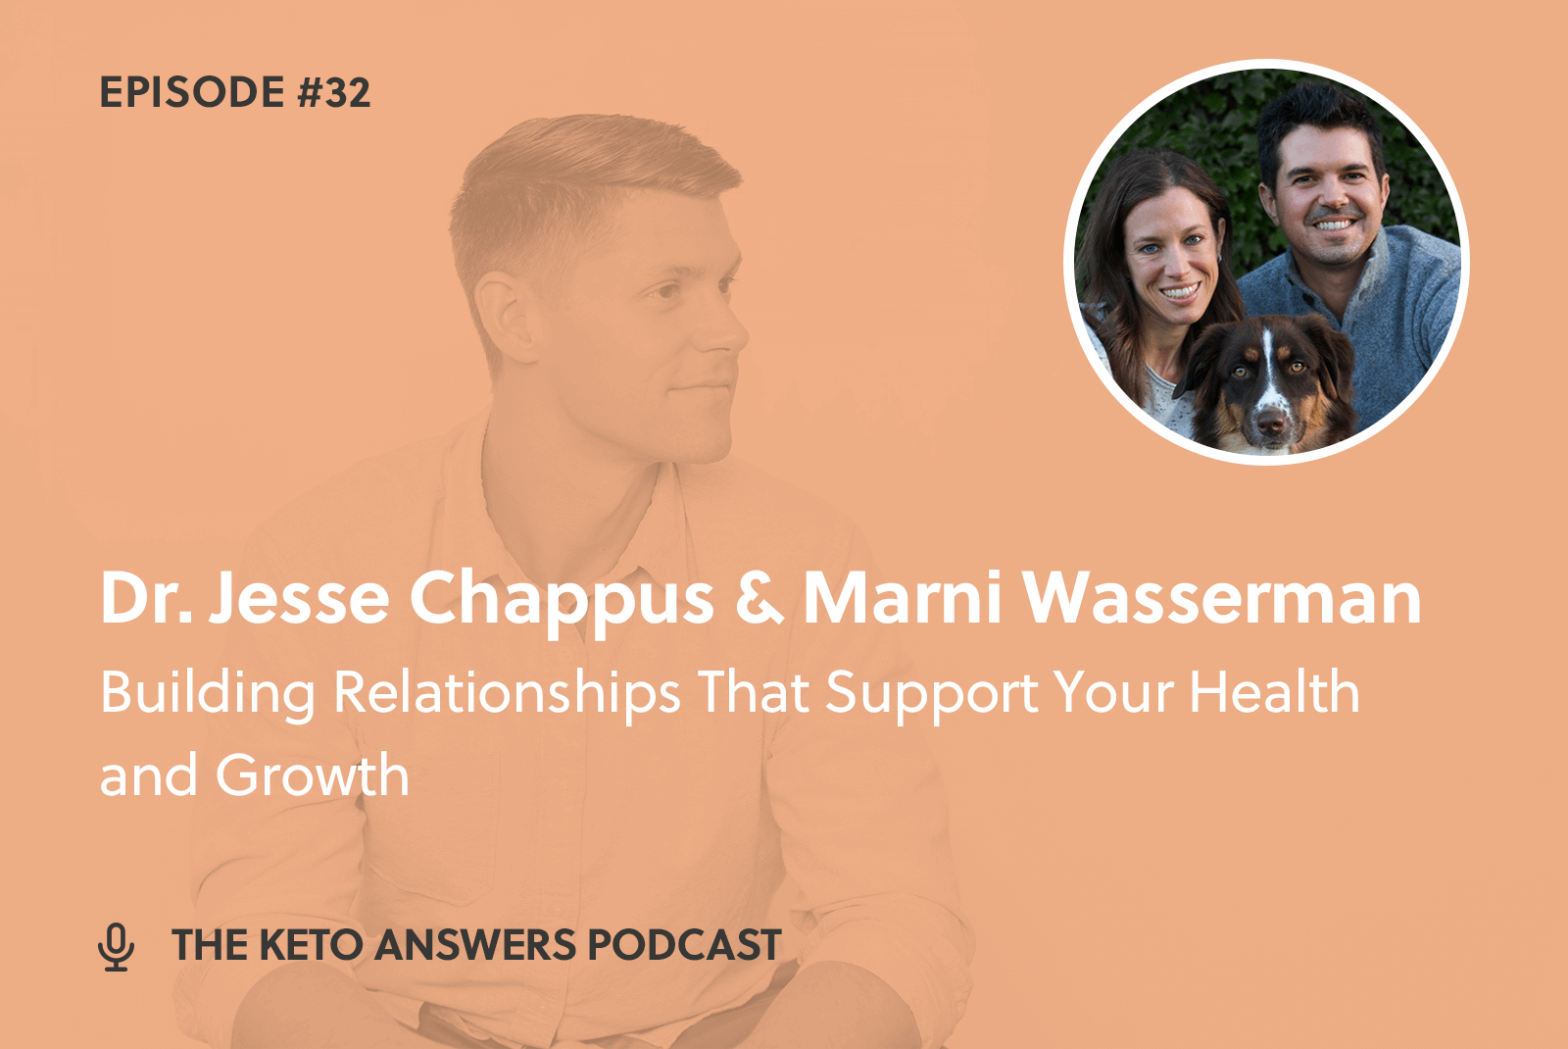 032: Dr. Jesse Chappus & Marni Wasserman - Building Relationships That Support Your Health and Growth